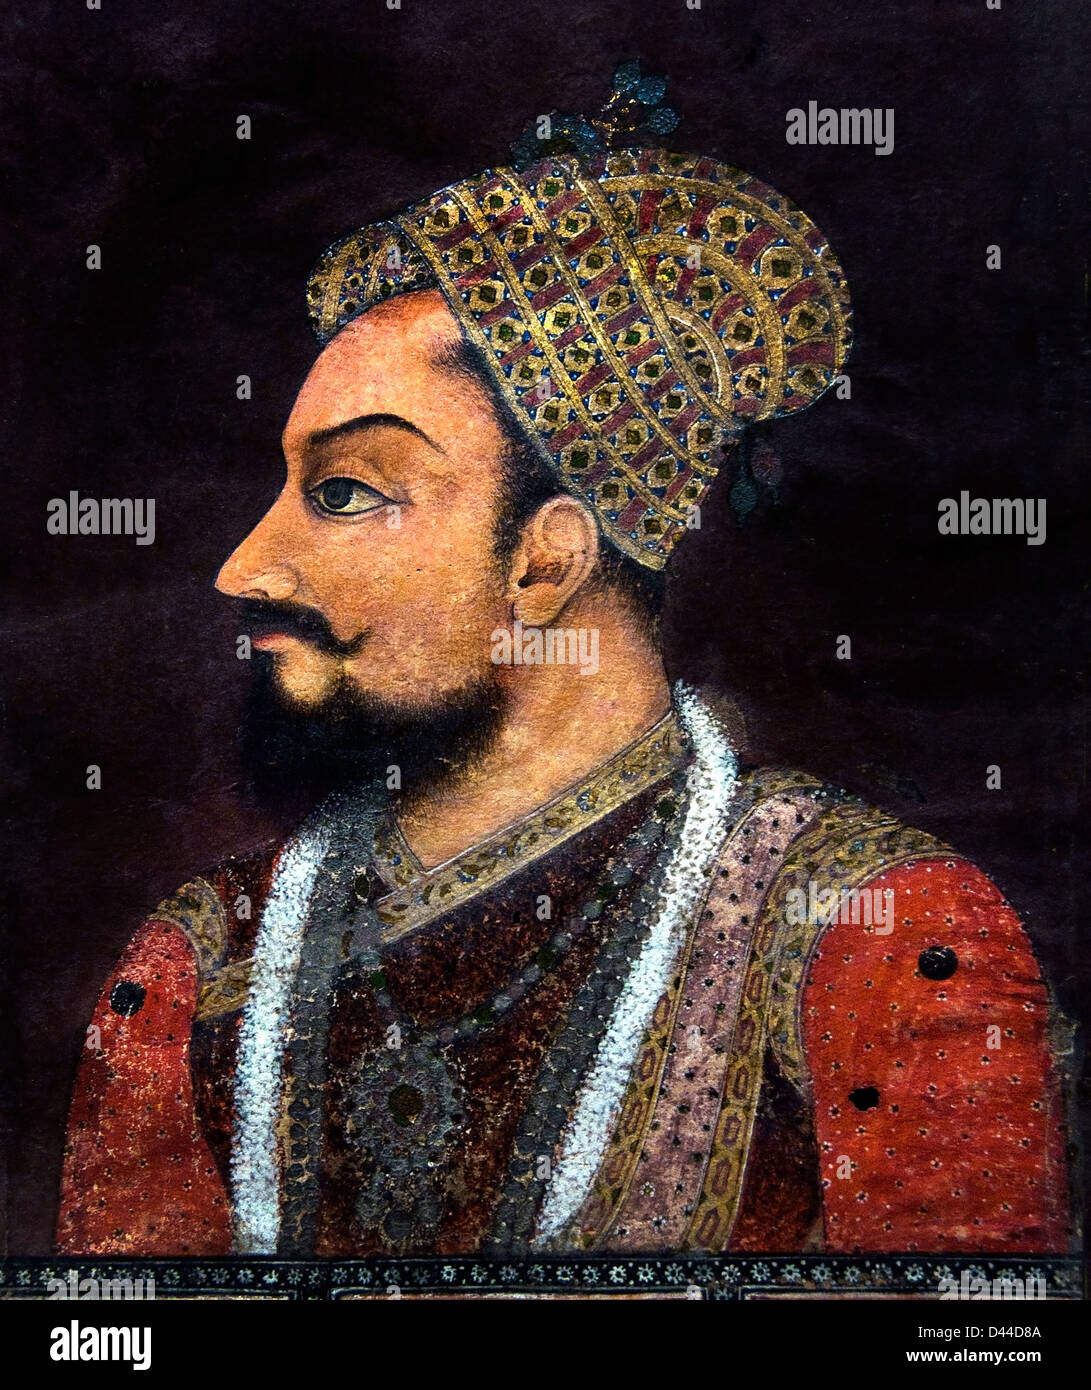 Muhammad Adil Shah fourth ruler of the Sur dynasty medieval Afghan dynasty of northern India17th Cent - muhammad-adil-shah-fourth-ruler-of-the-sur-dynasty-medieval-afghan-D44D8A